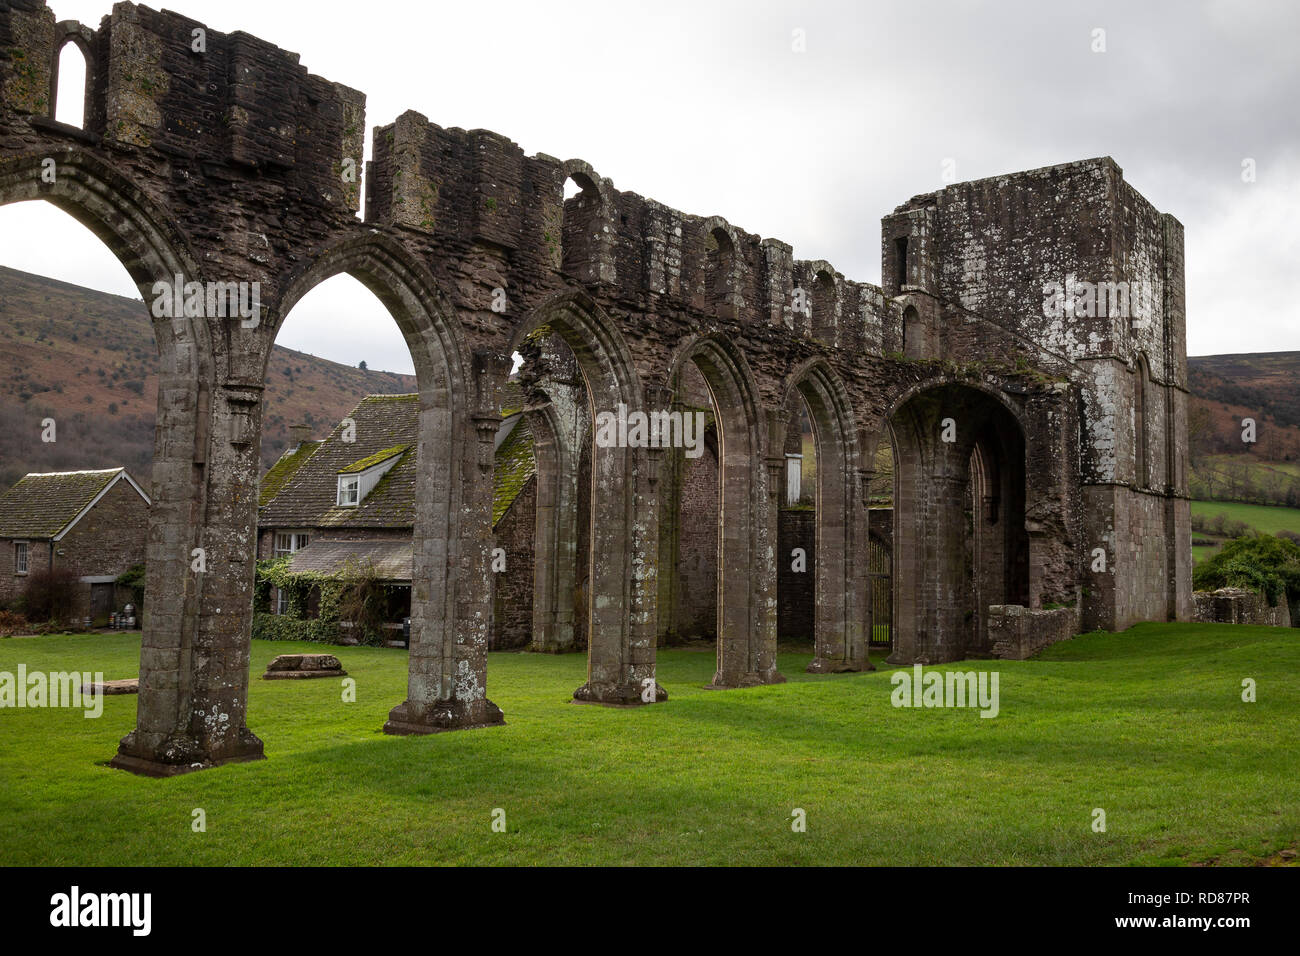 Llanthony Priory, in the Black Mountains, Brecon Beacons National Park, Monmouthshire, Wales. Stock Photo